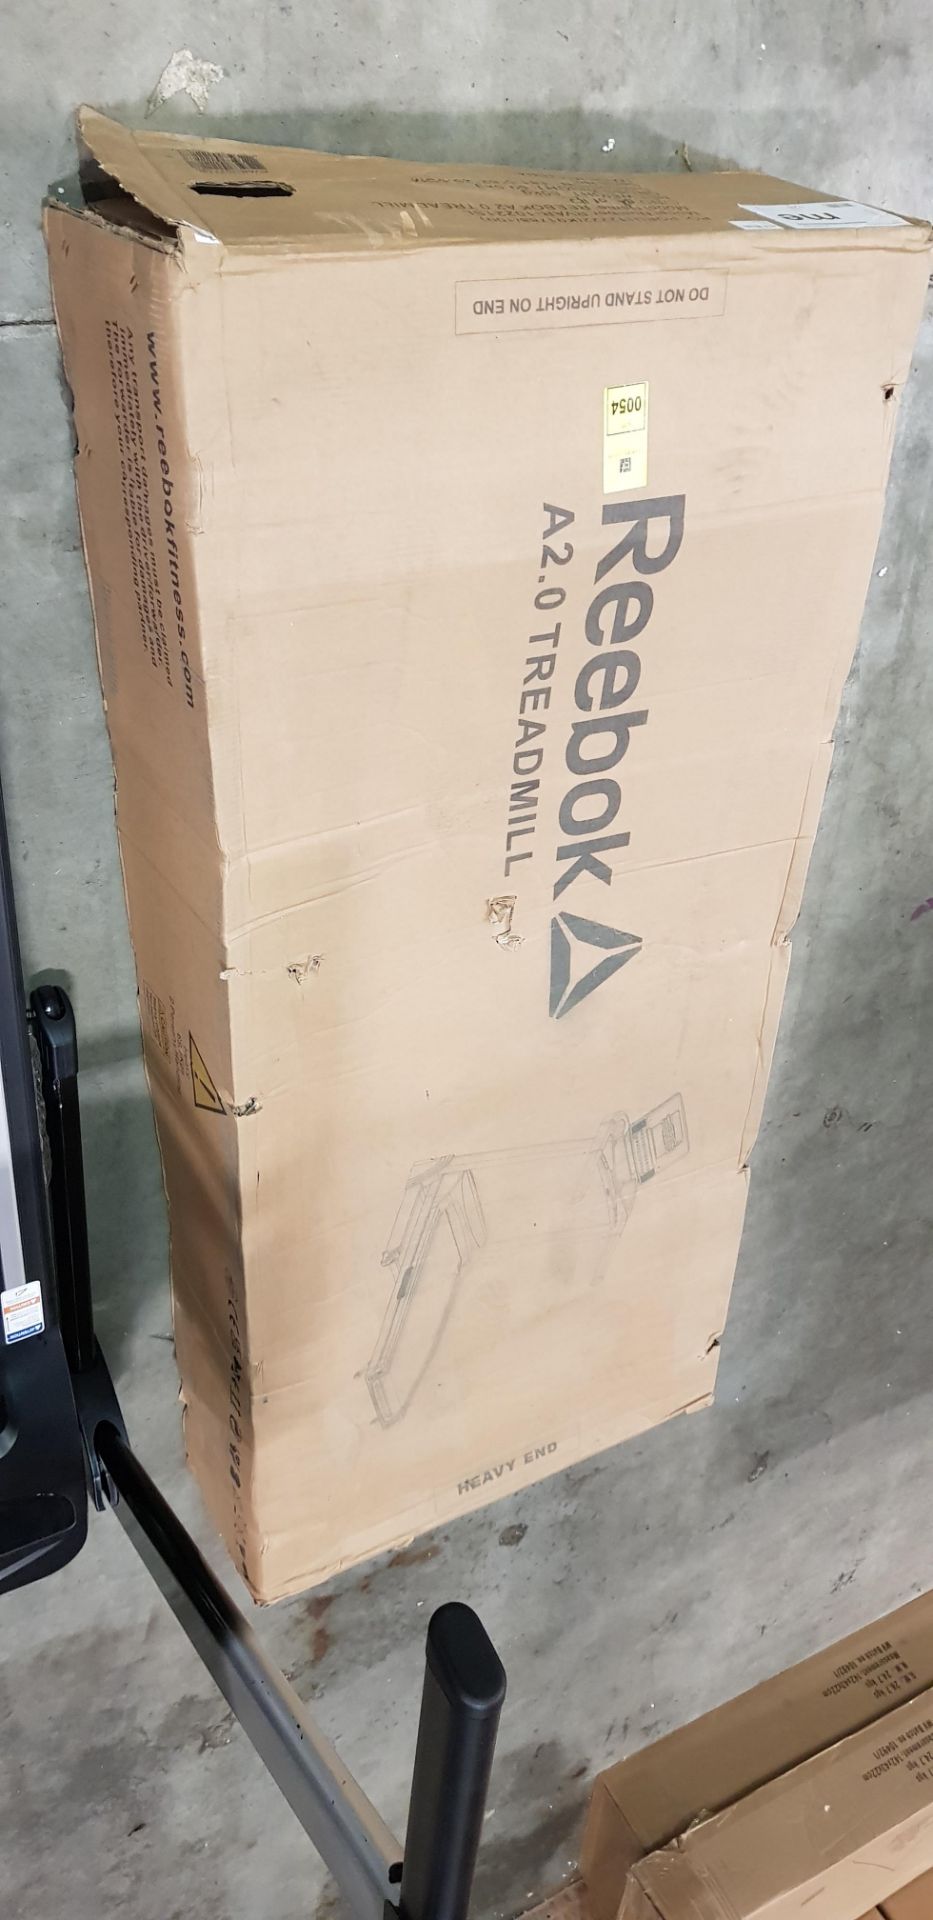 1 X BRAND NEW BOXED REEBOK A2.0 ASTRORIDE TREADMILL - INCLUDES ATTACHMENTS - 2 MANUAL INCLINE LEVELS - Image 2 of 2